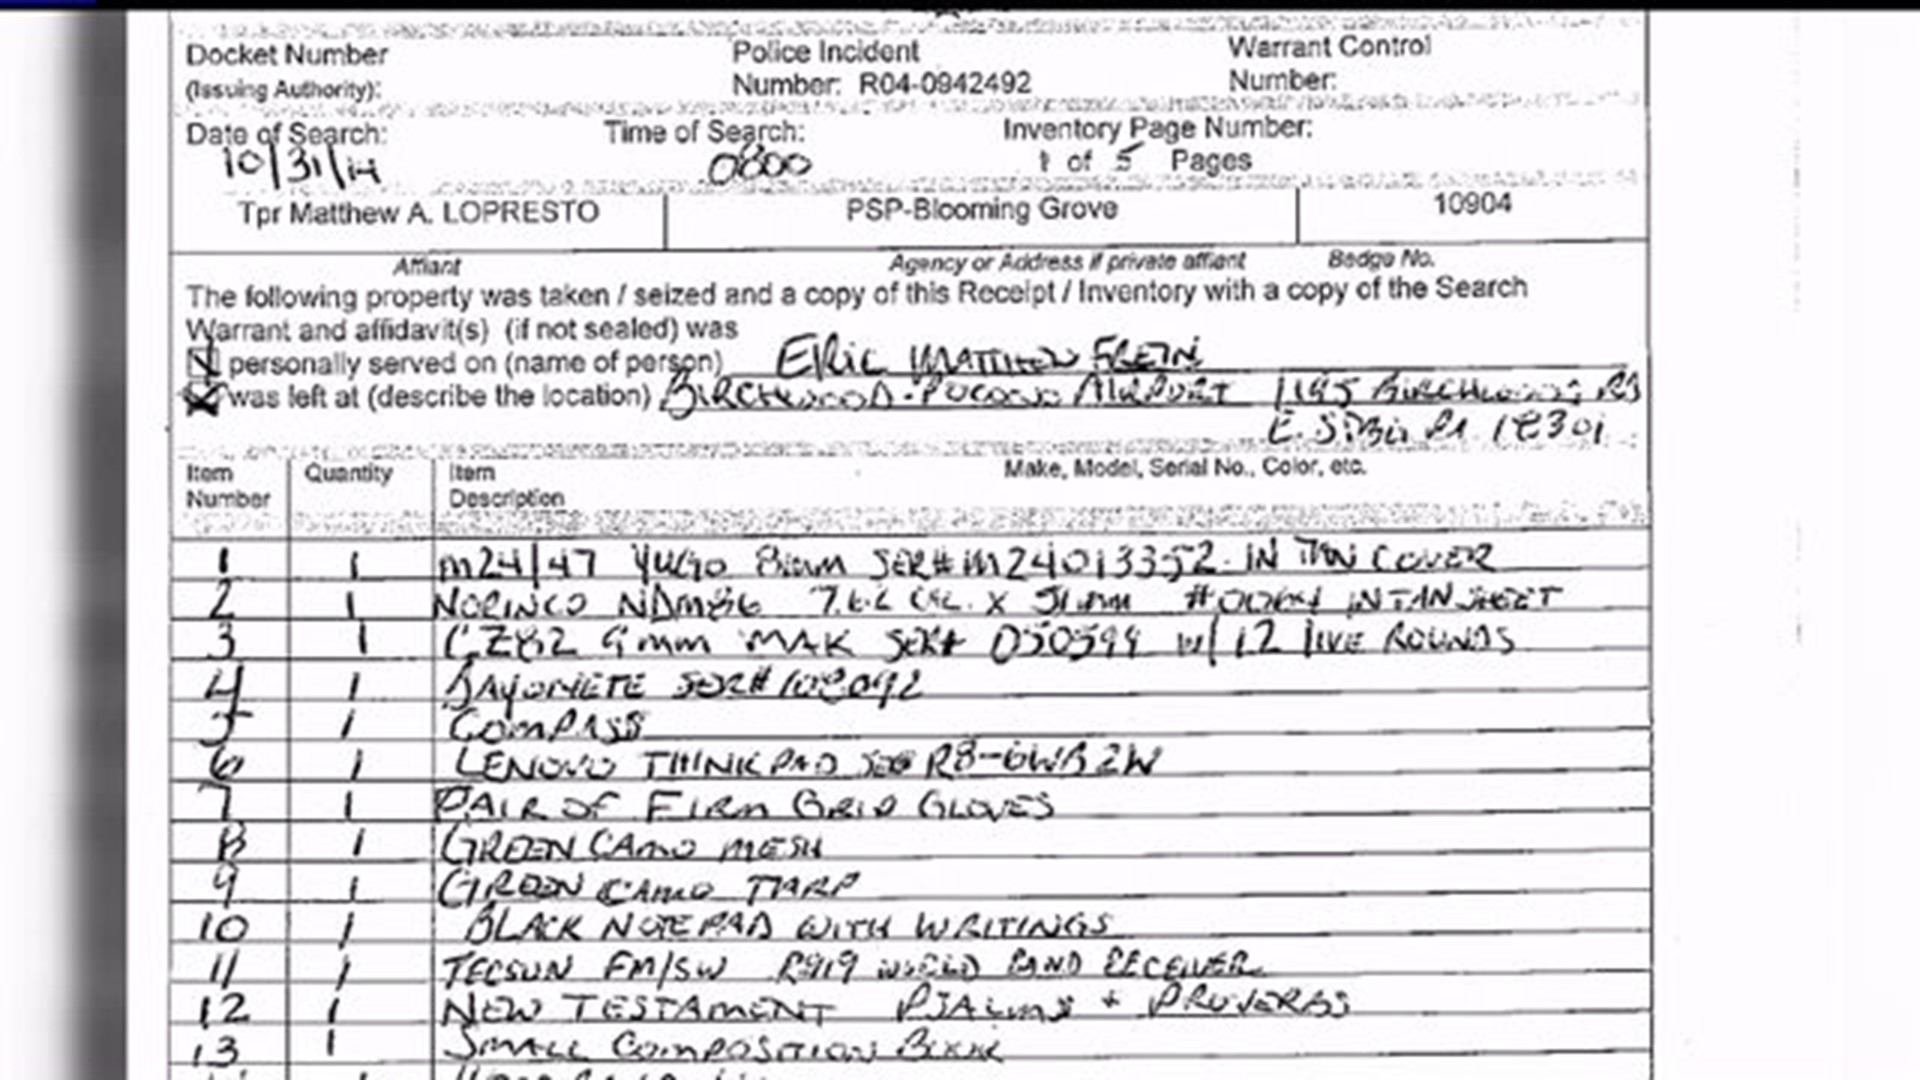 More Eric Frein warrants and items from airport hanger